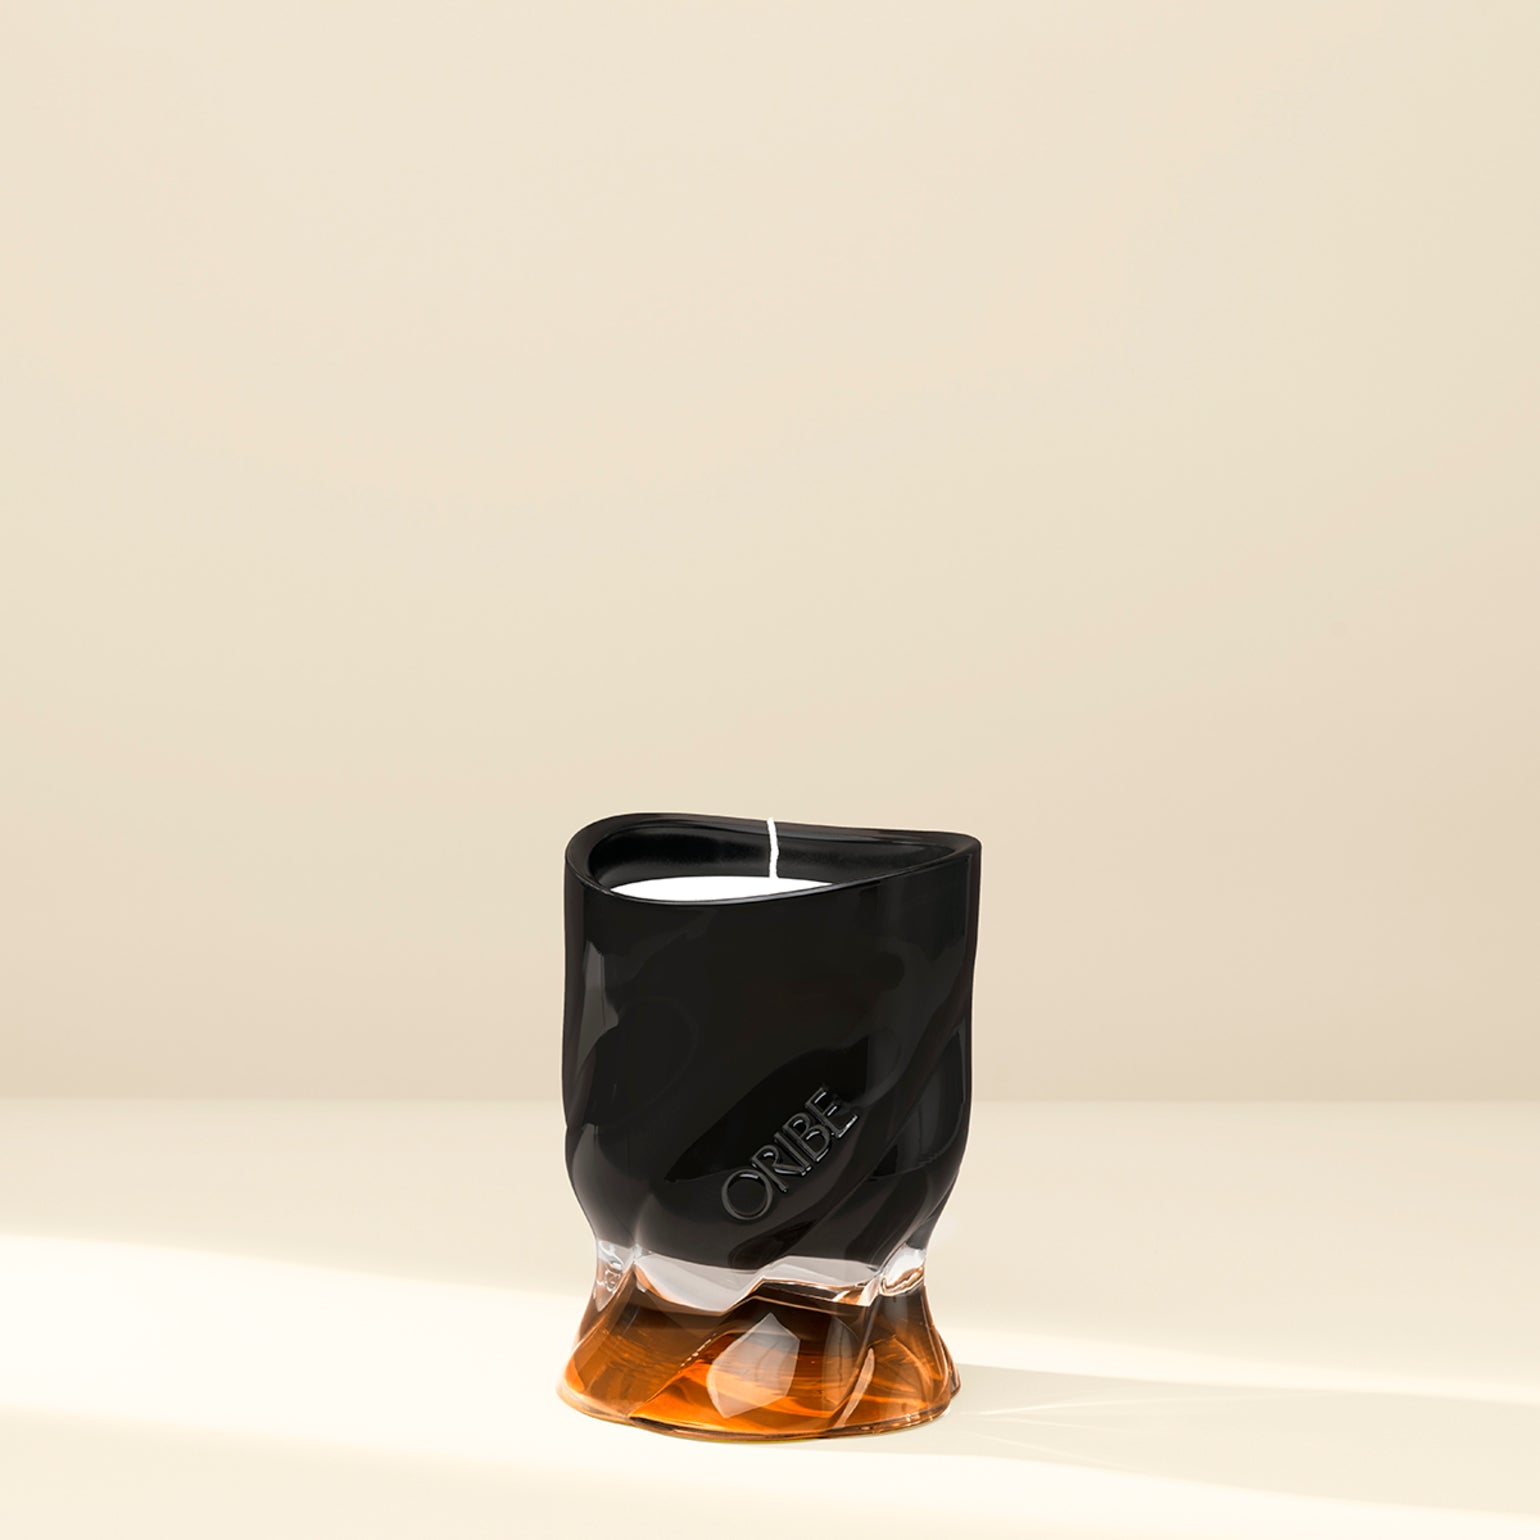 Côte d'Azur Scented Candle by Oribe